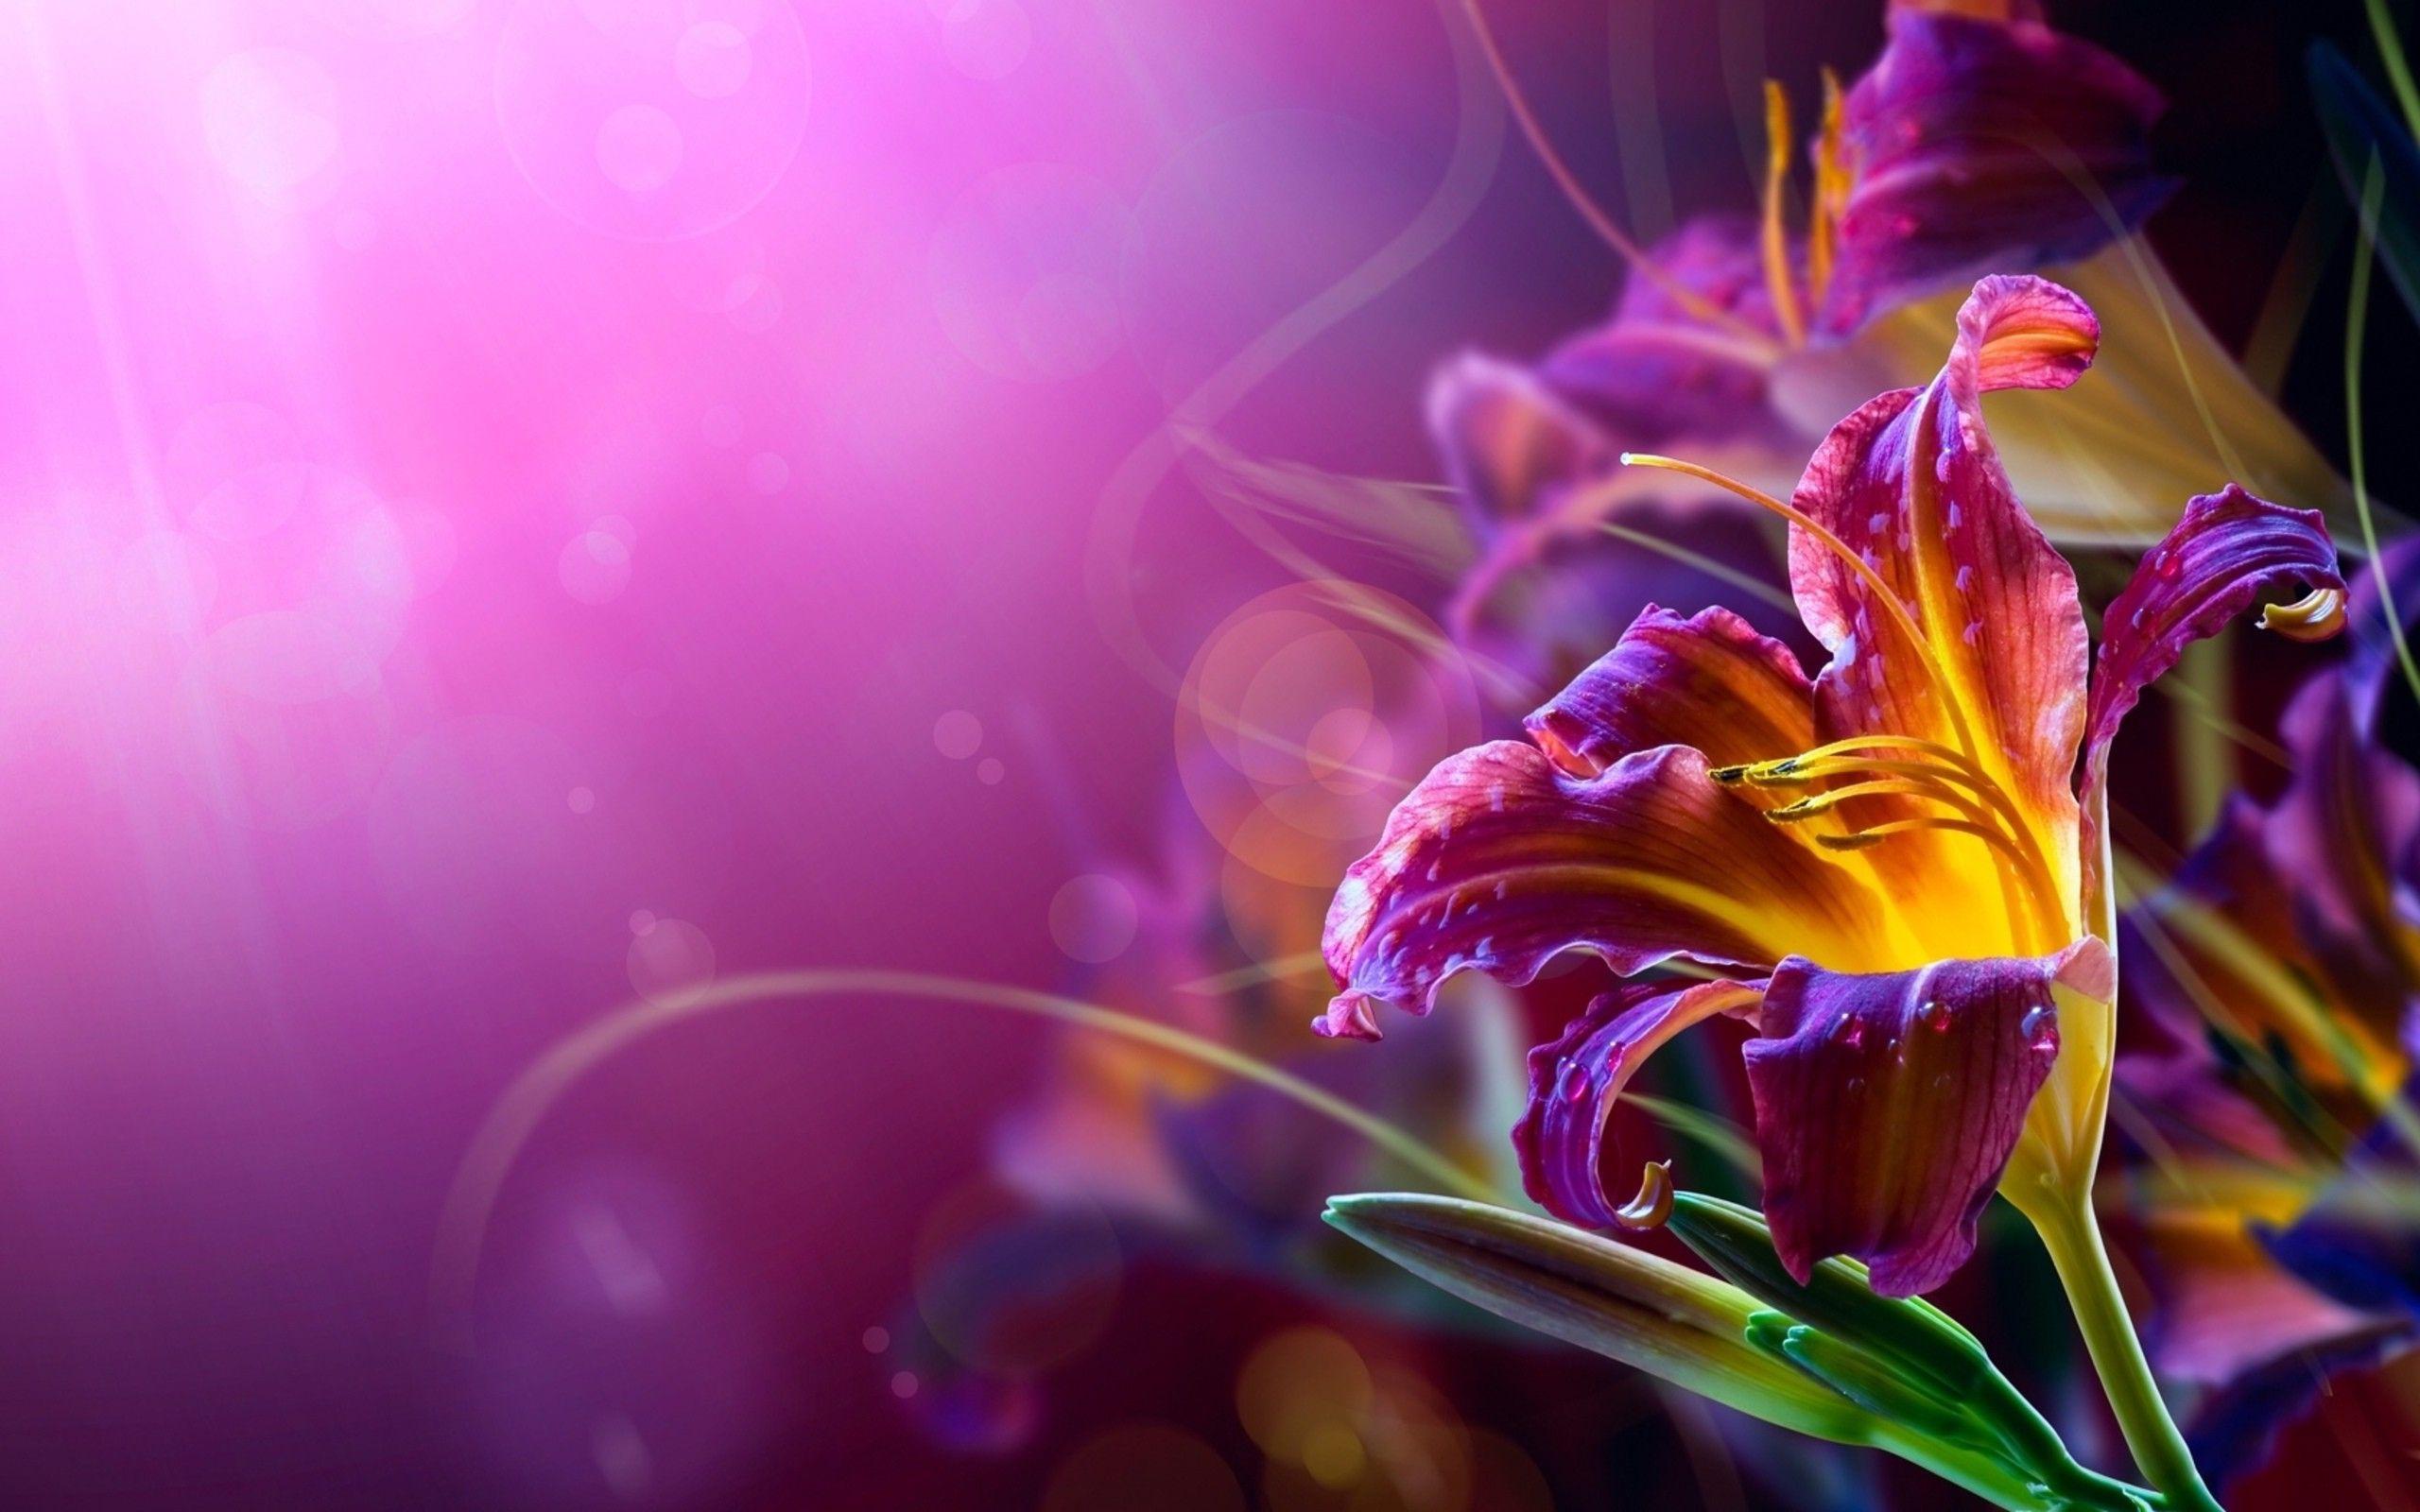 Abstract Flower Wallpaper Free Is 4K Wallpaper. Abstract flowers